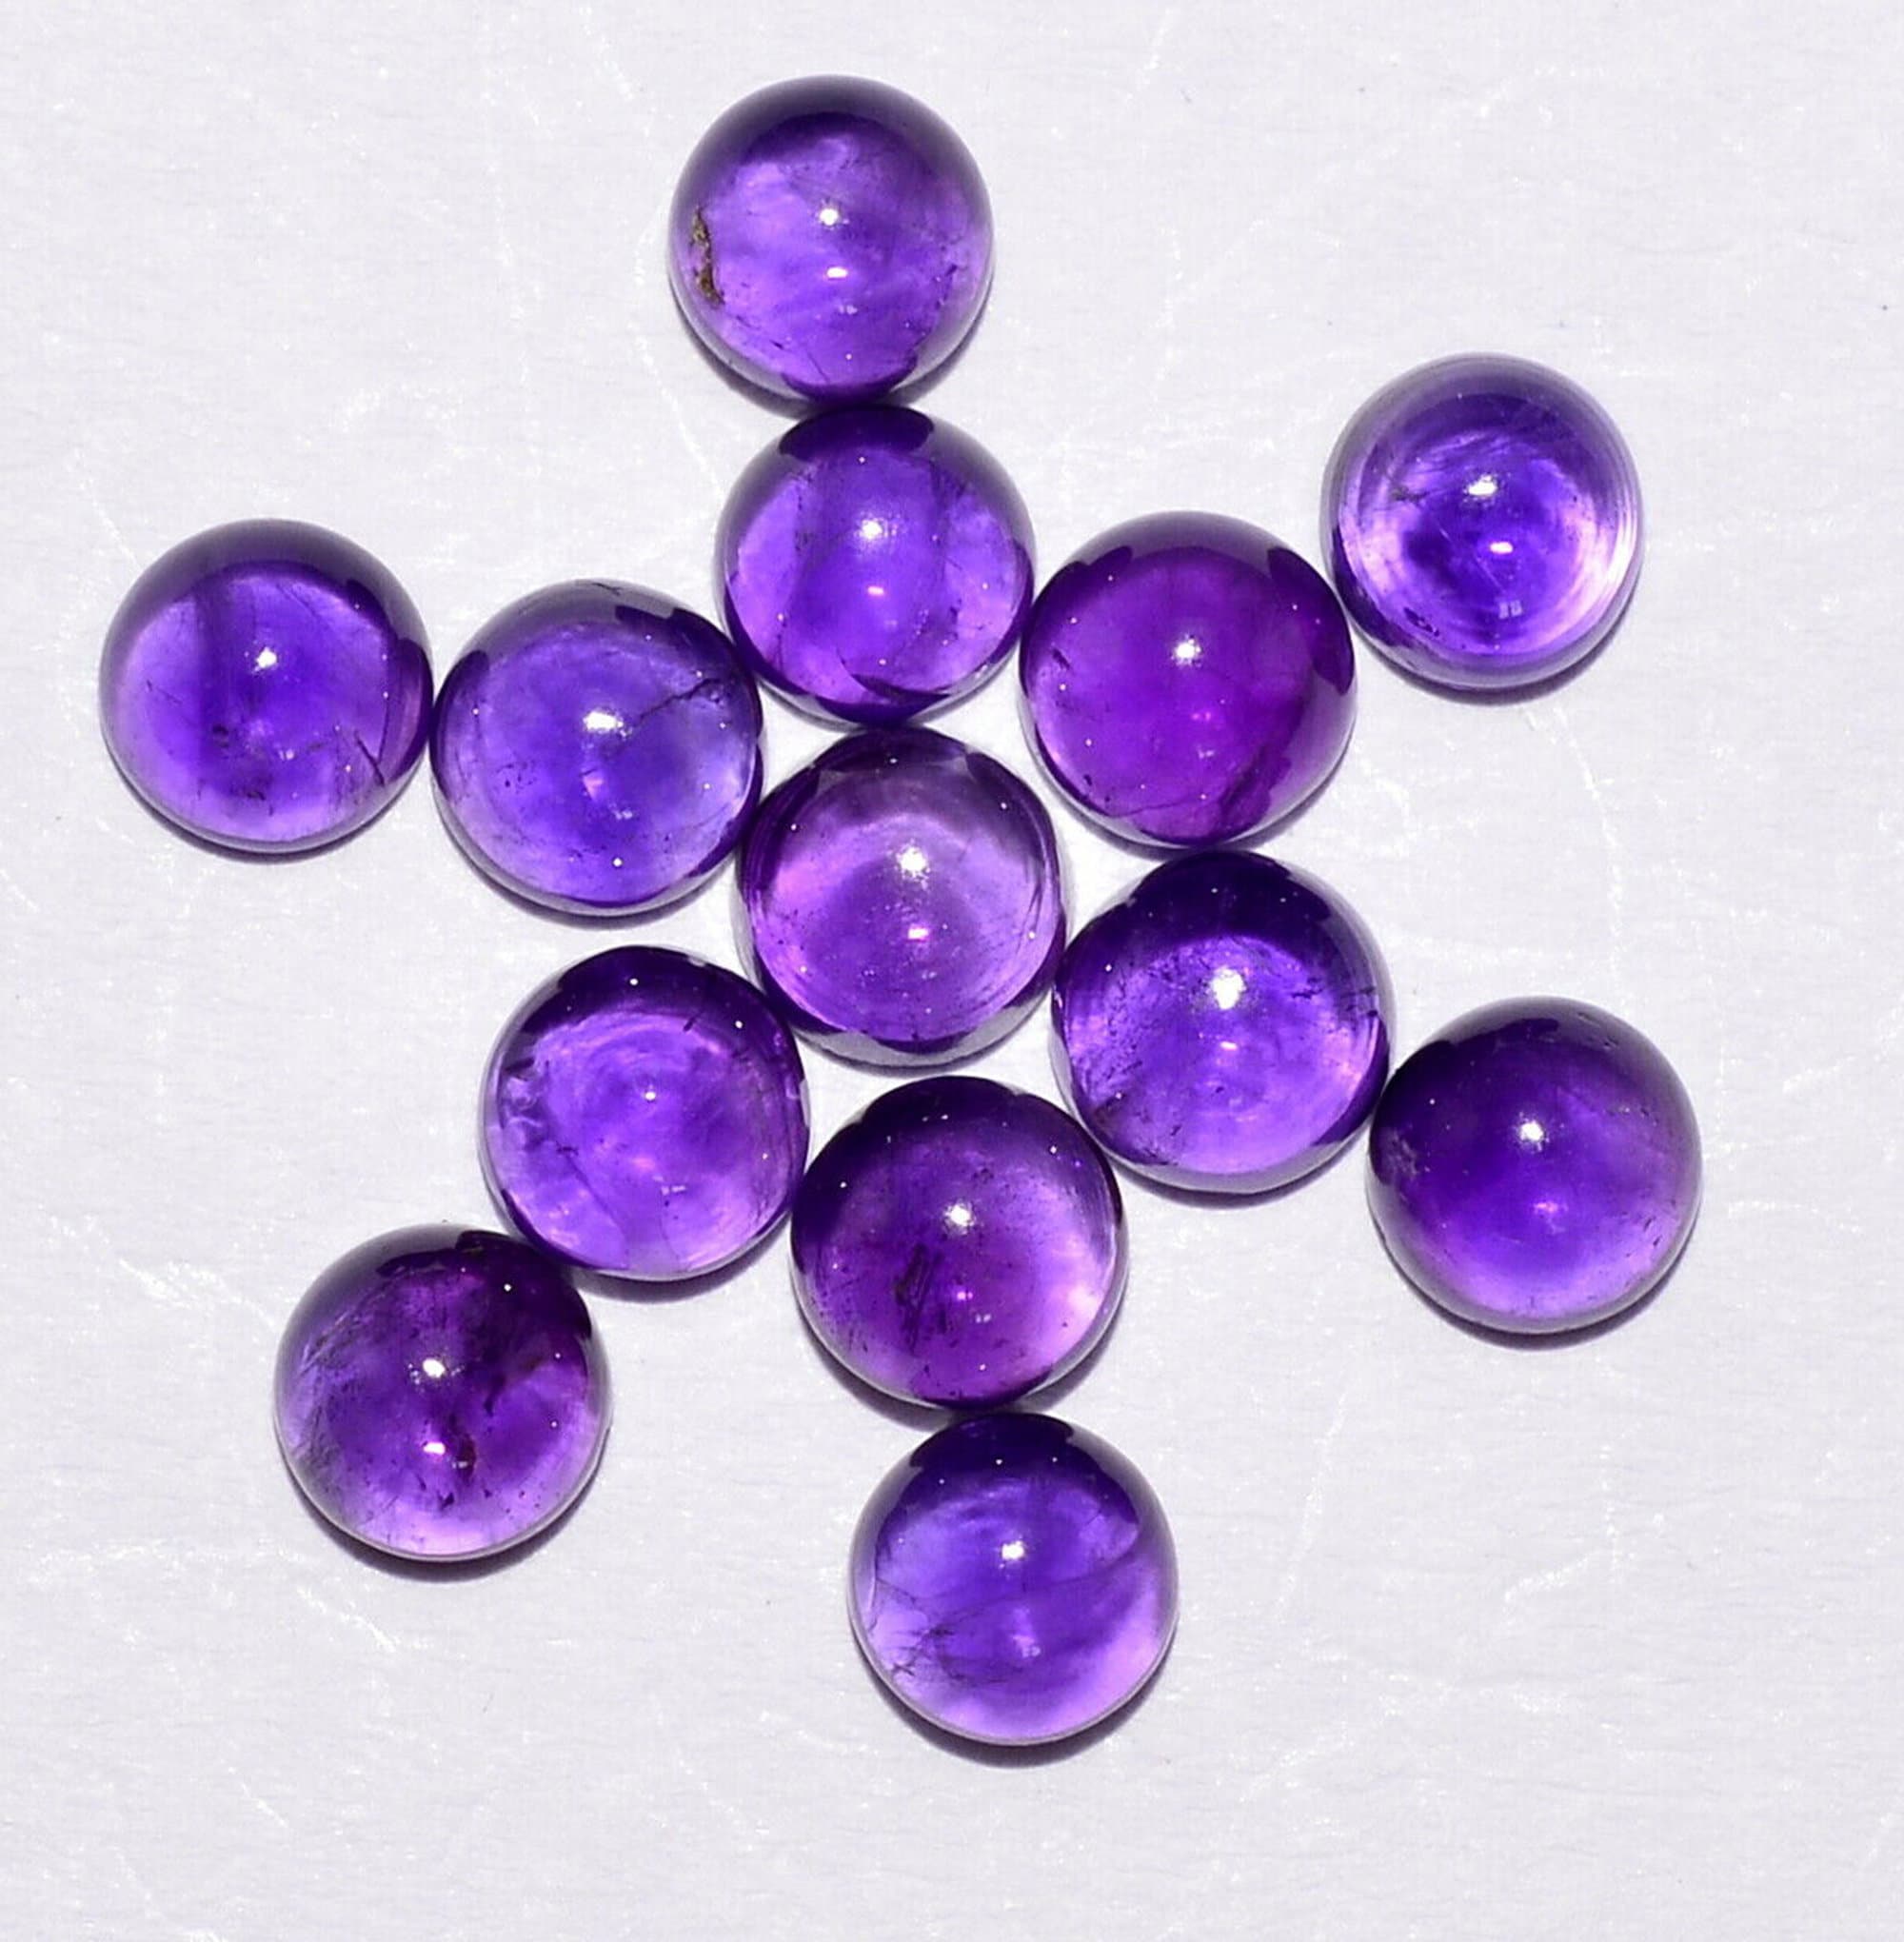 Sale !! Lot 100% Natural Amethyst 3x3mm-10x10mm Round Cabochon Loose Gemstones 